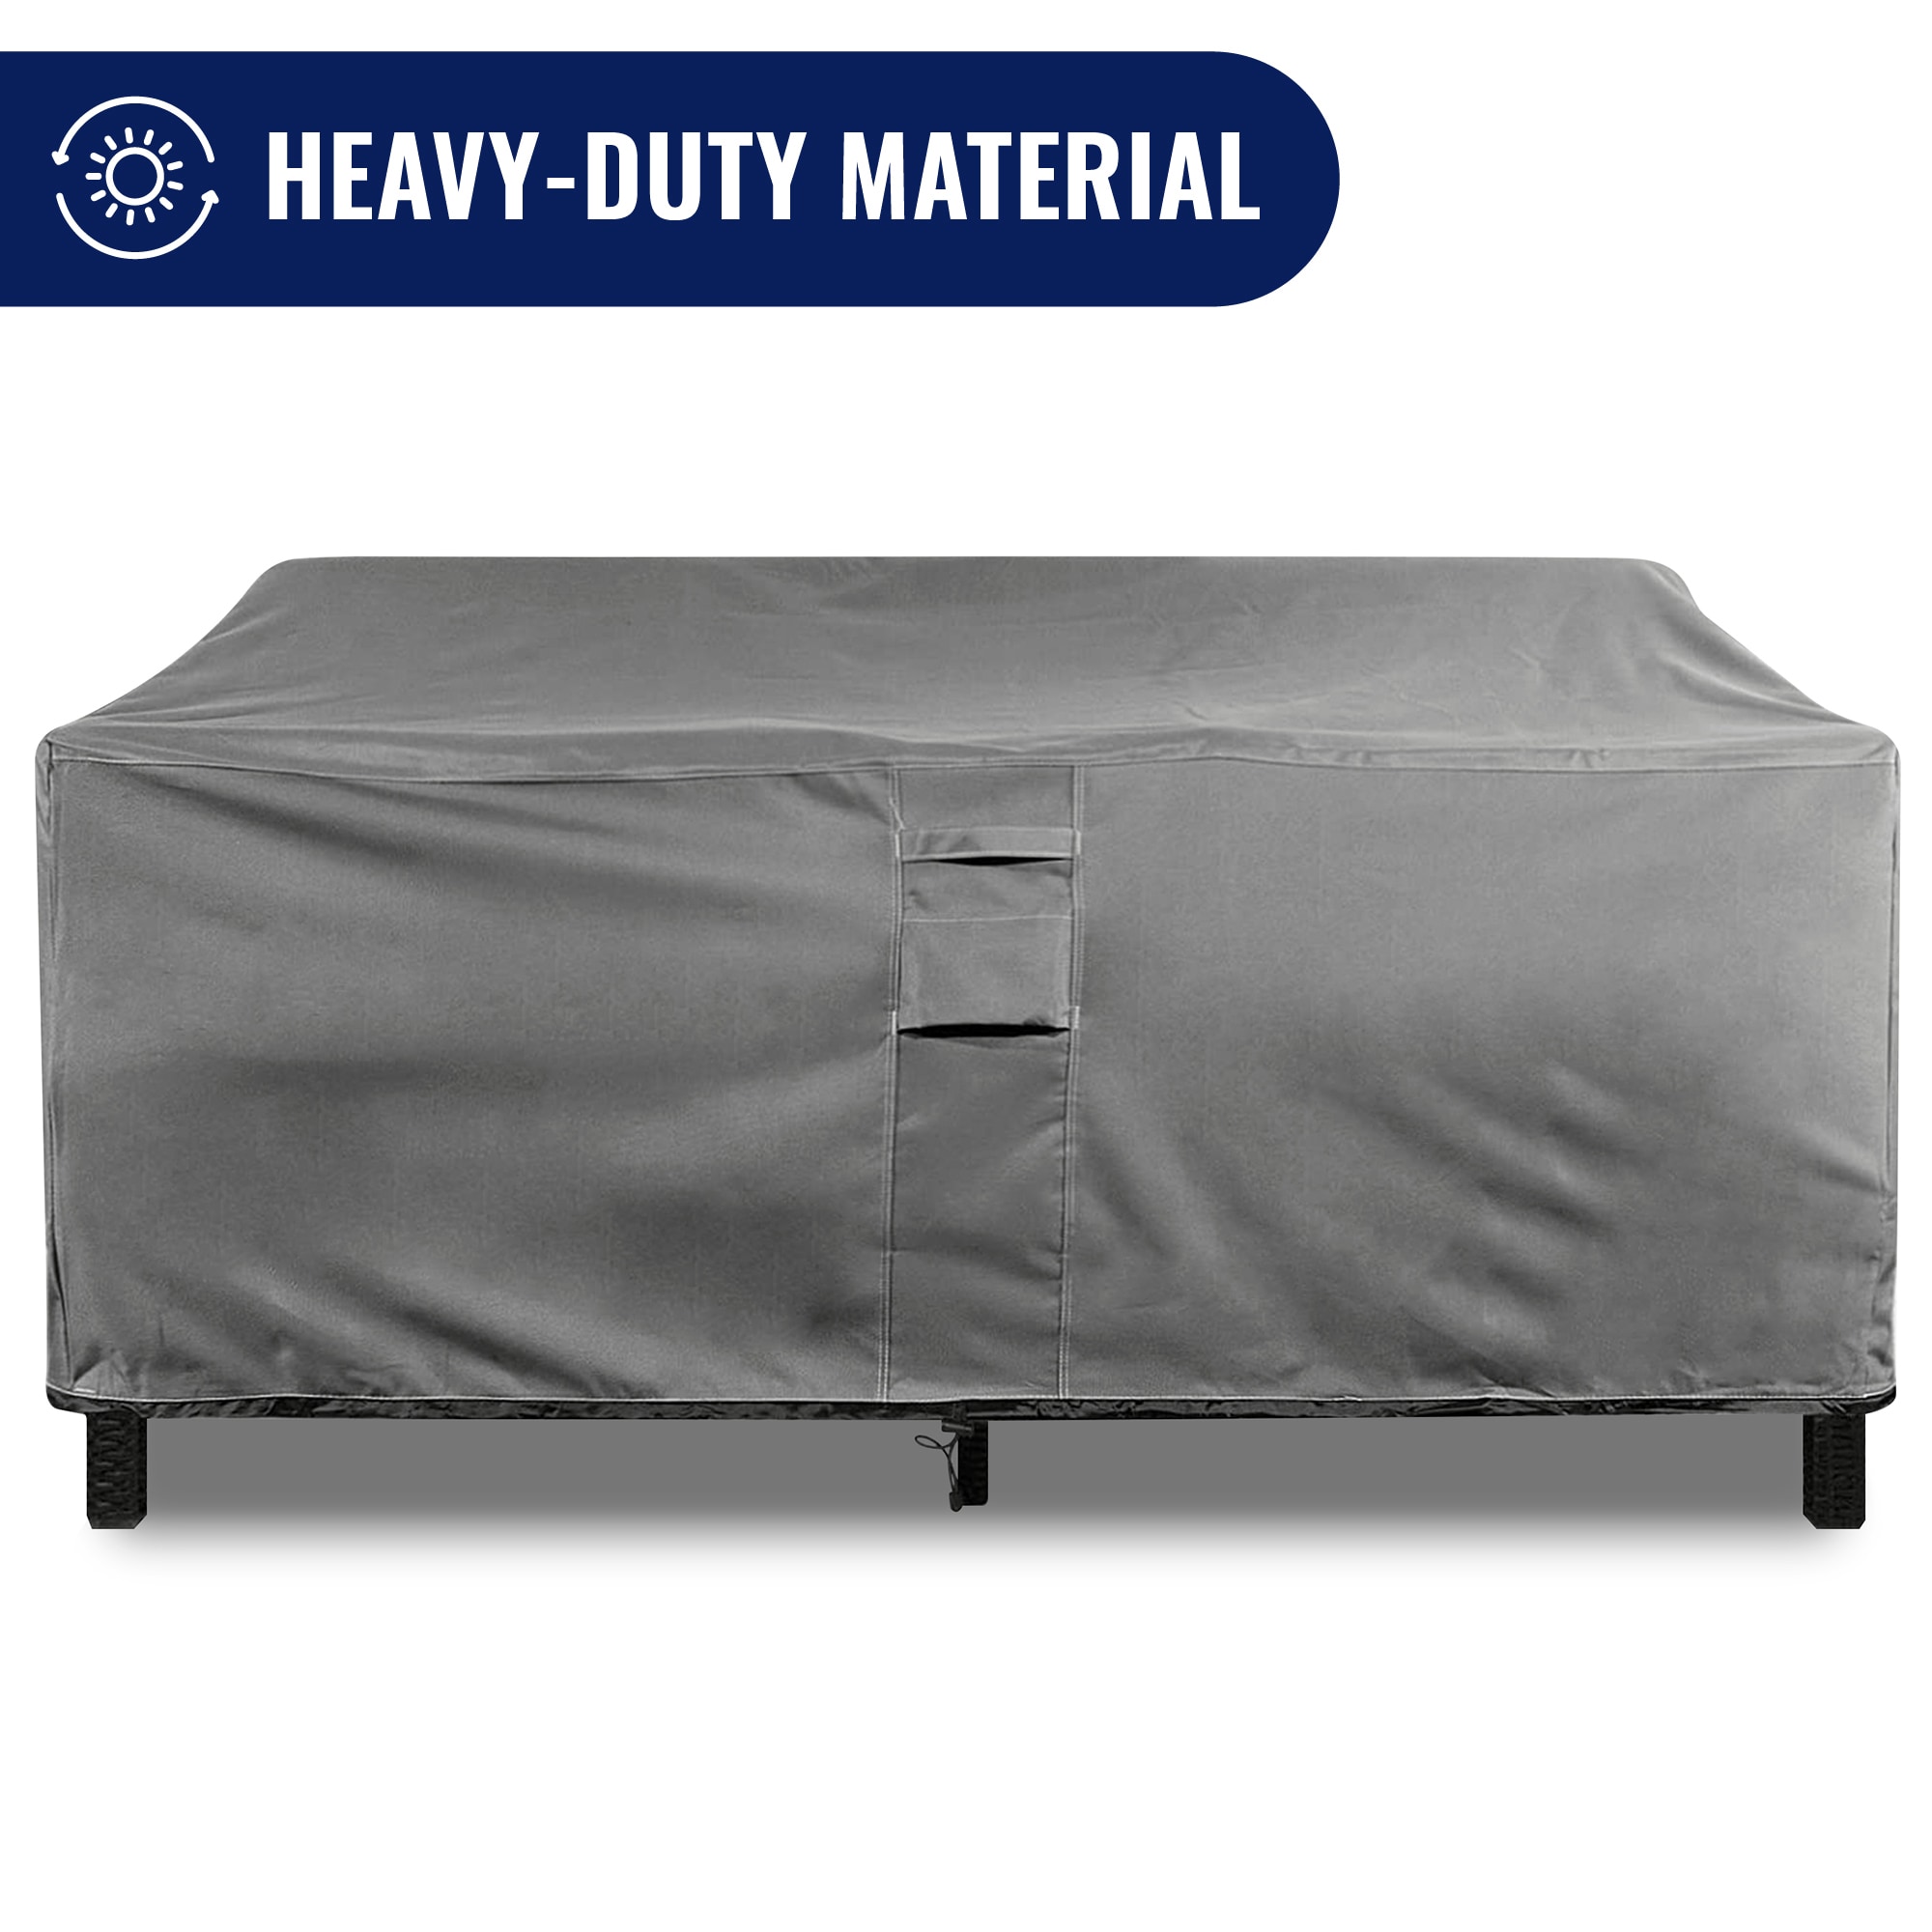 Square Ottoman Cover Heavy Duty Fabric with Drawstring for Snug fit 23 W x 23 L x 18 H, Grey Outdoor Ottoman Cover 12 Oz Waterproof & Weather Resistant Patio Furniture Covers 